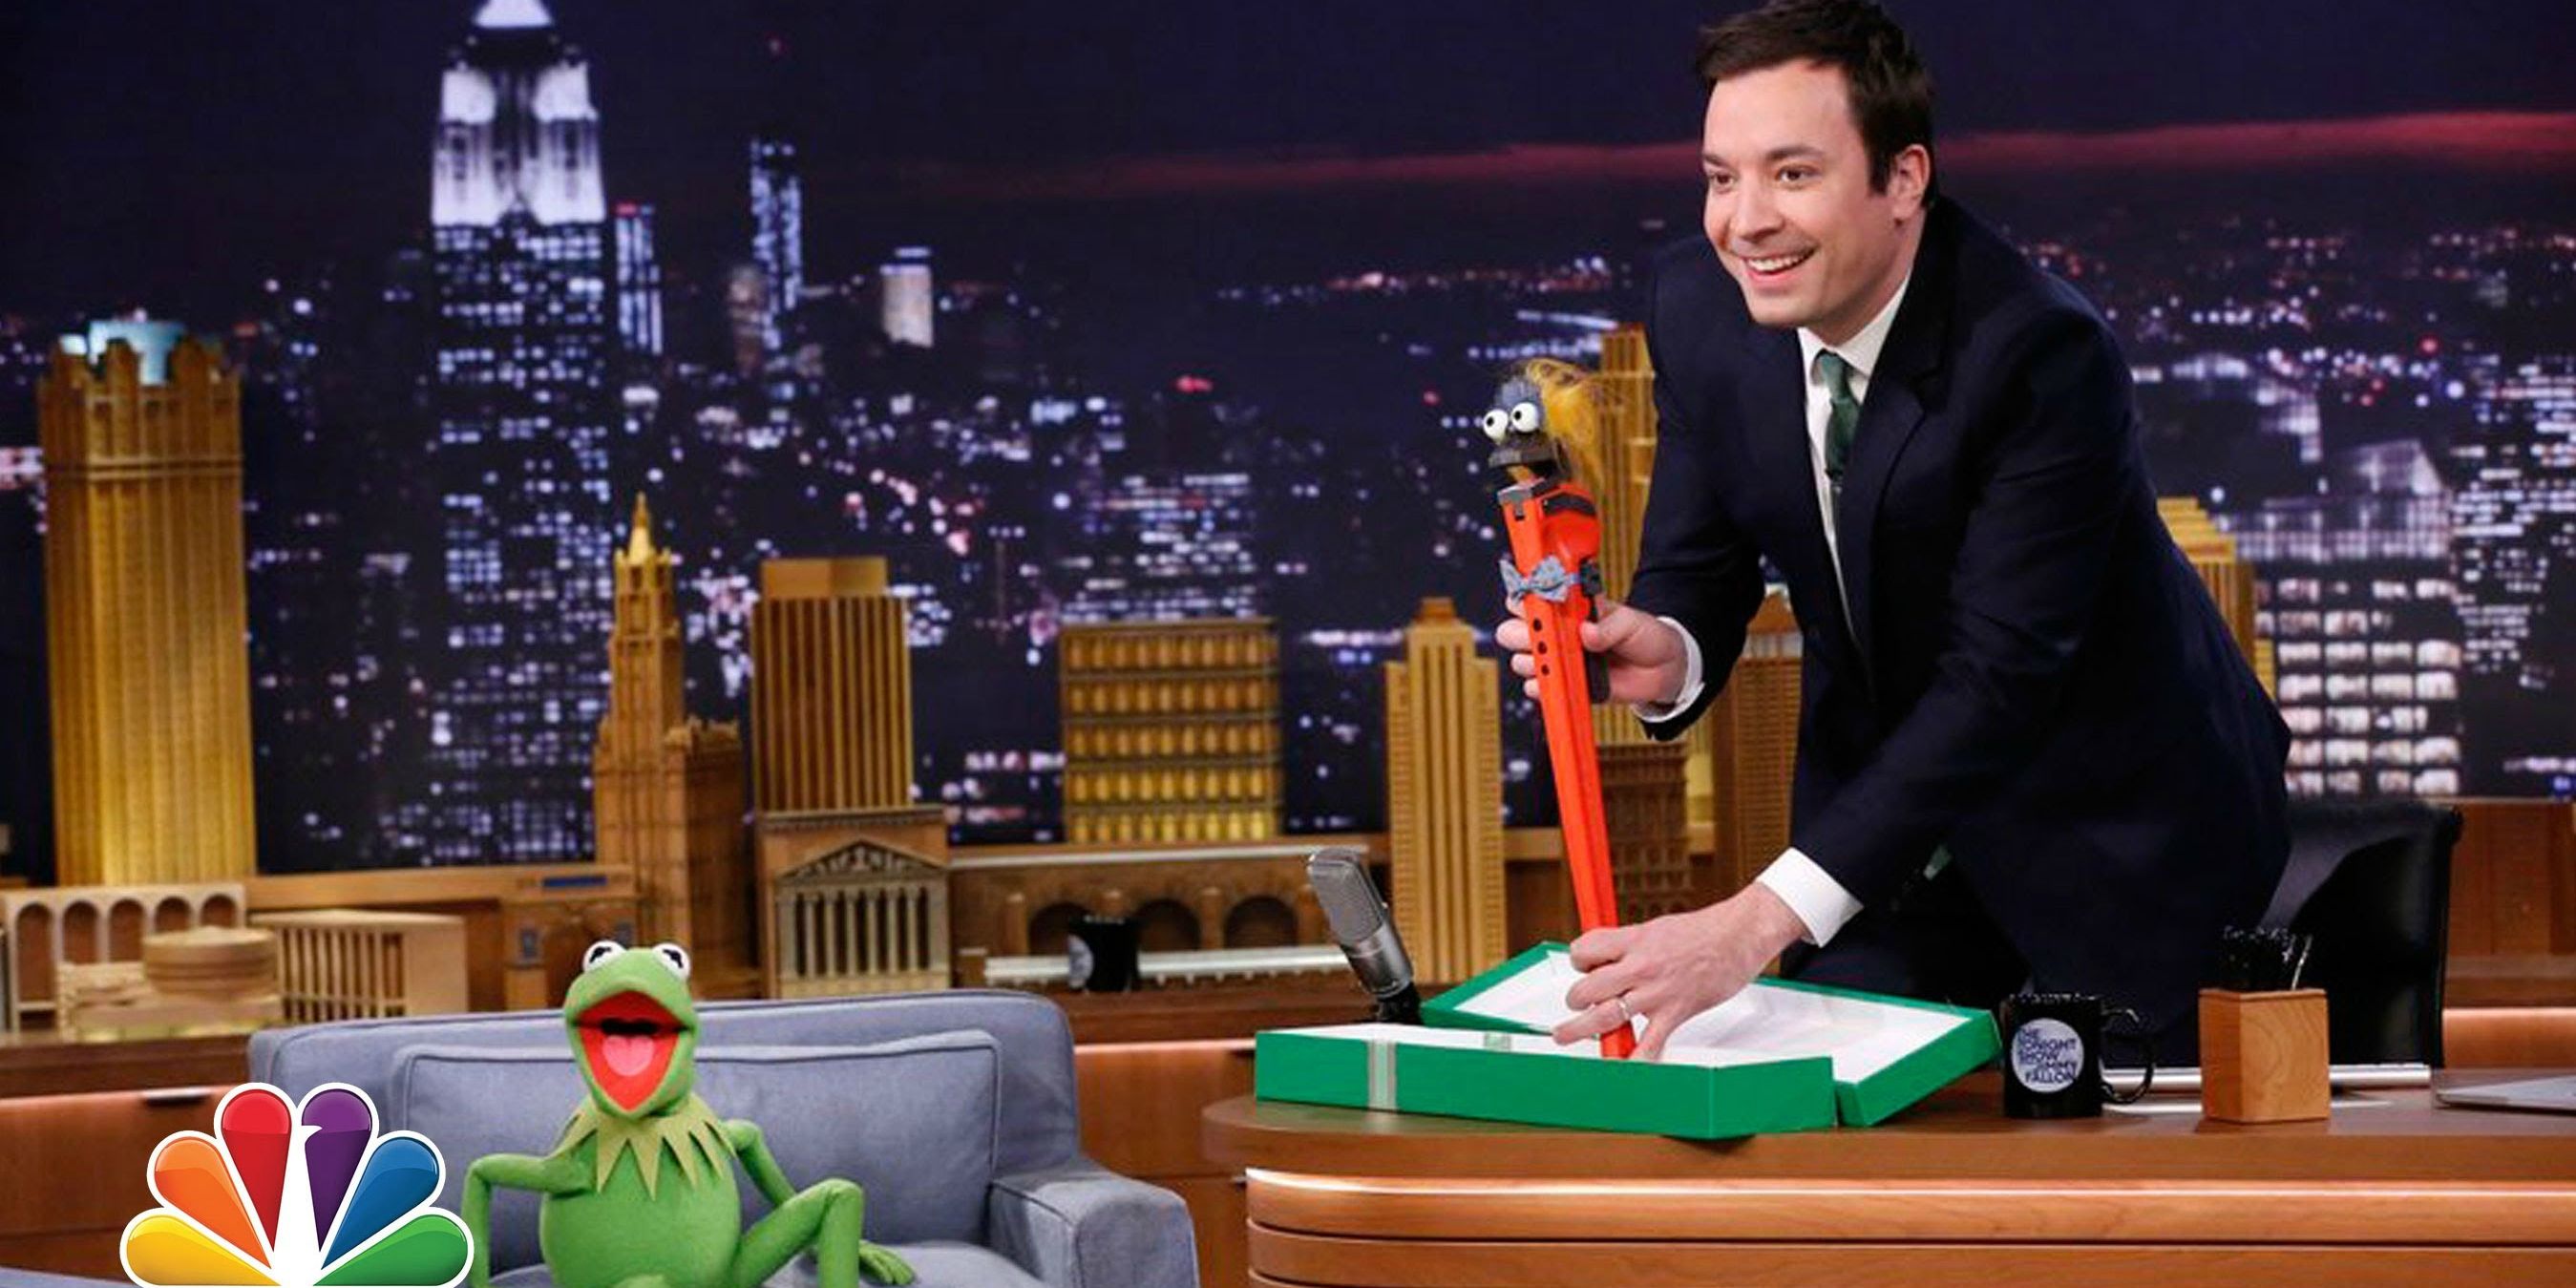 Kermit the Frog on The Tonight Show With Jimmy Fallon